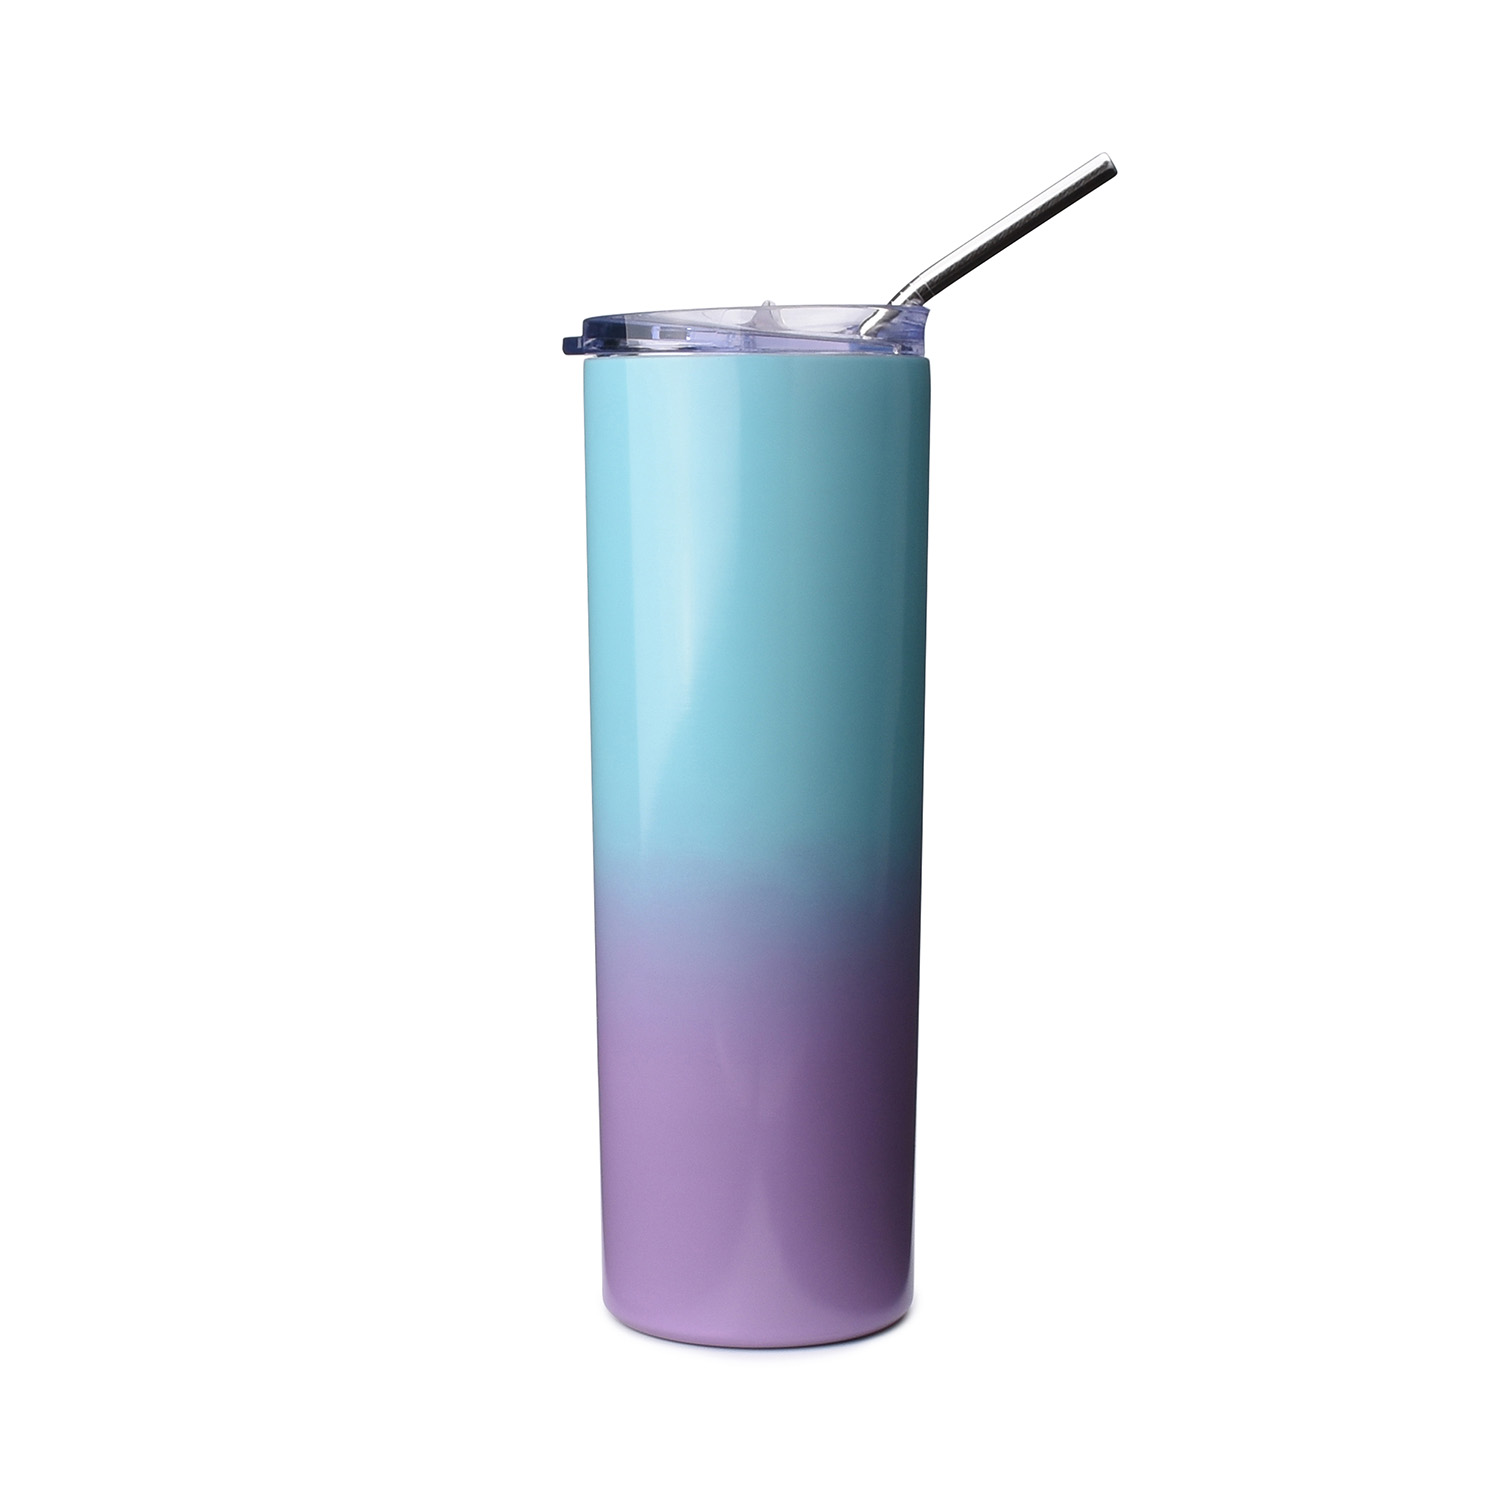 Custom Printed 20 oz. Double Wall Acrylic Tumblers with Matching Straws